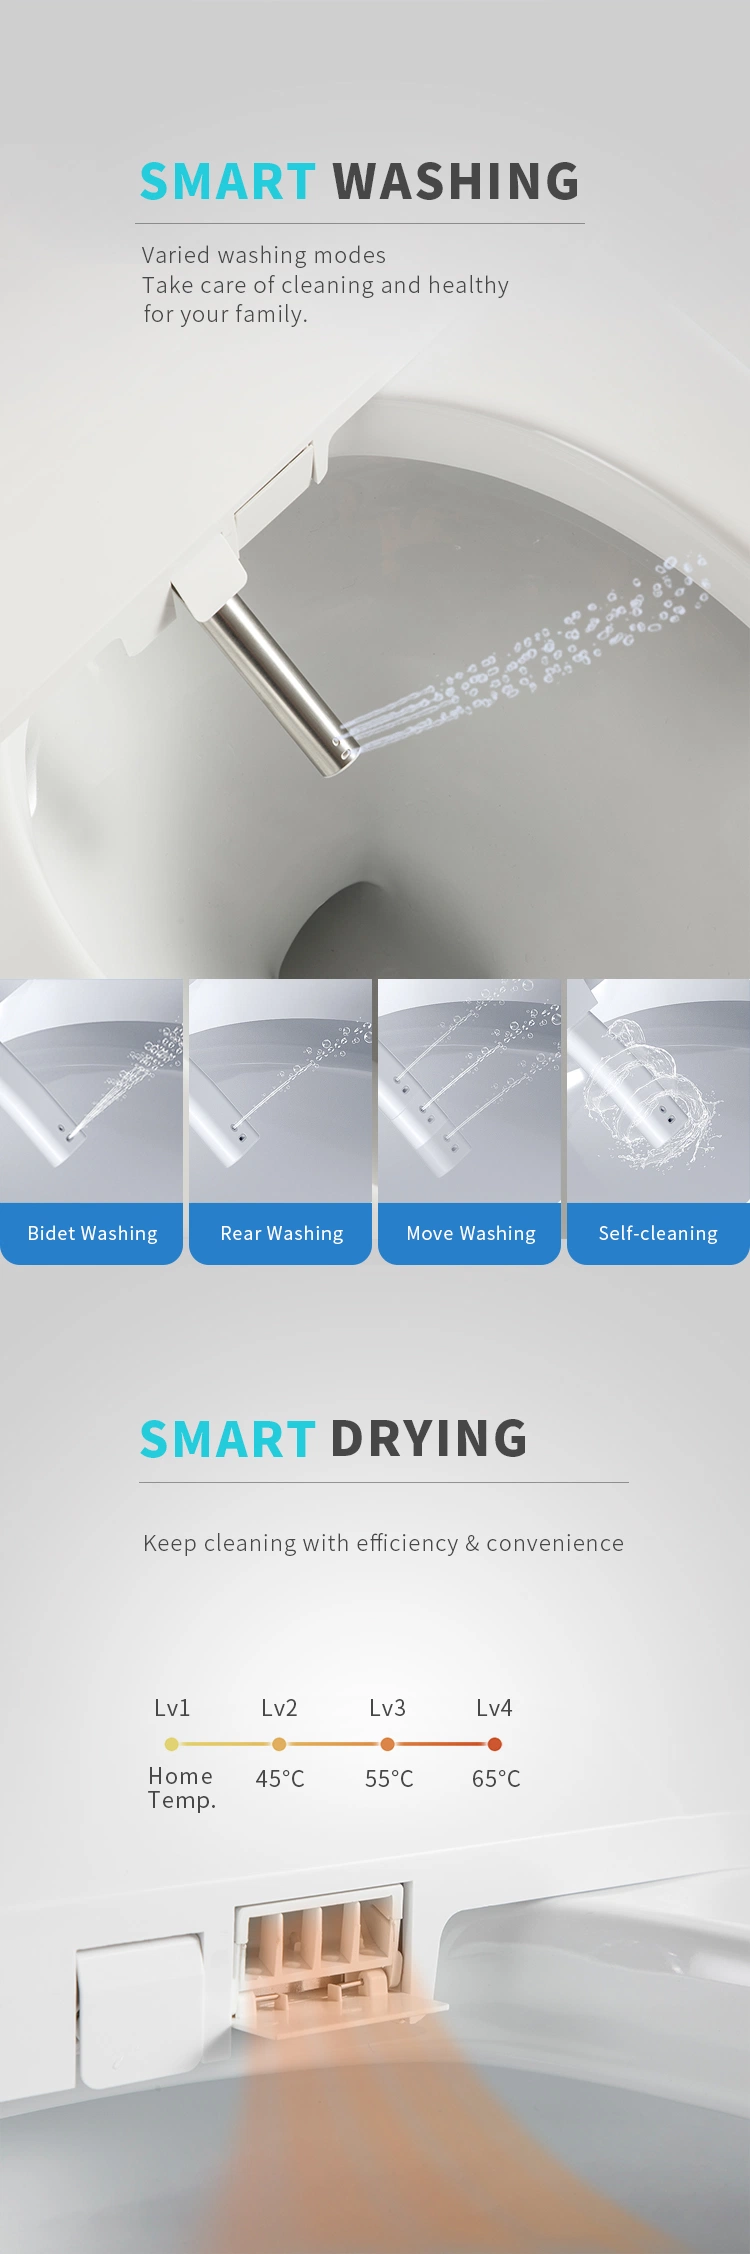 Upc Smart Toilet with Intelligent Bidet and Automatic Functions Hot Sale in Us